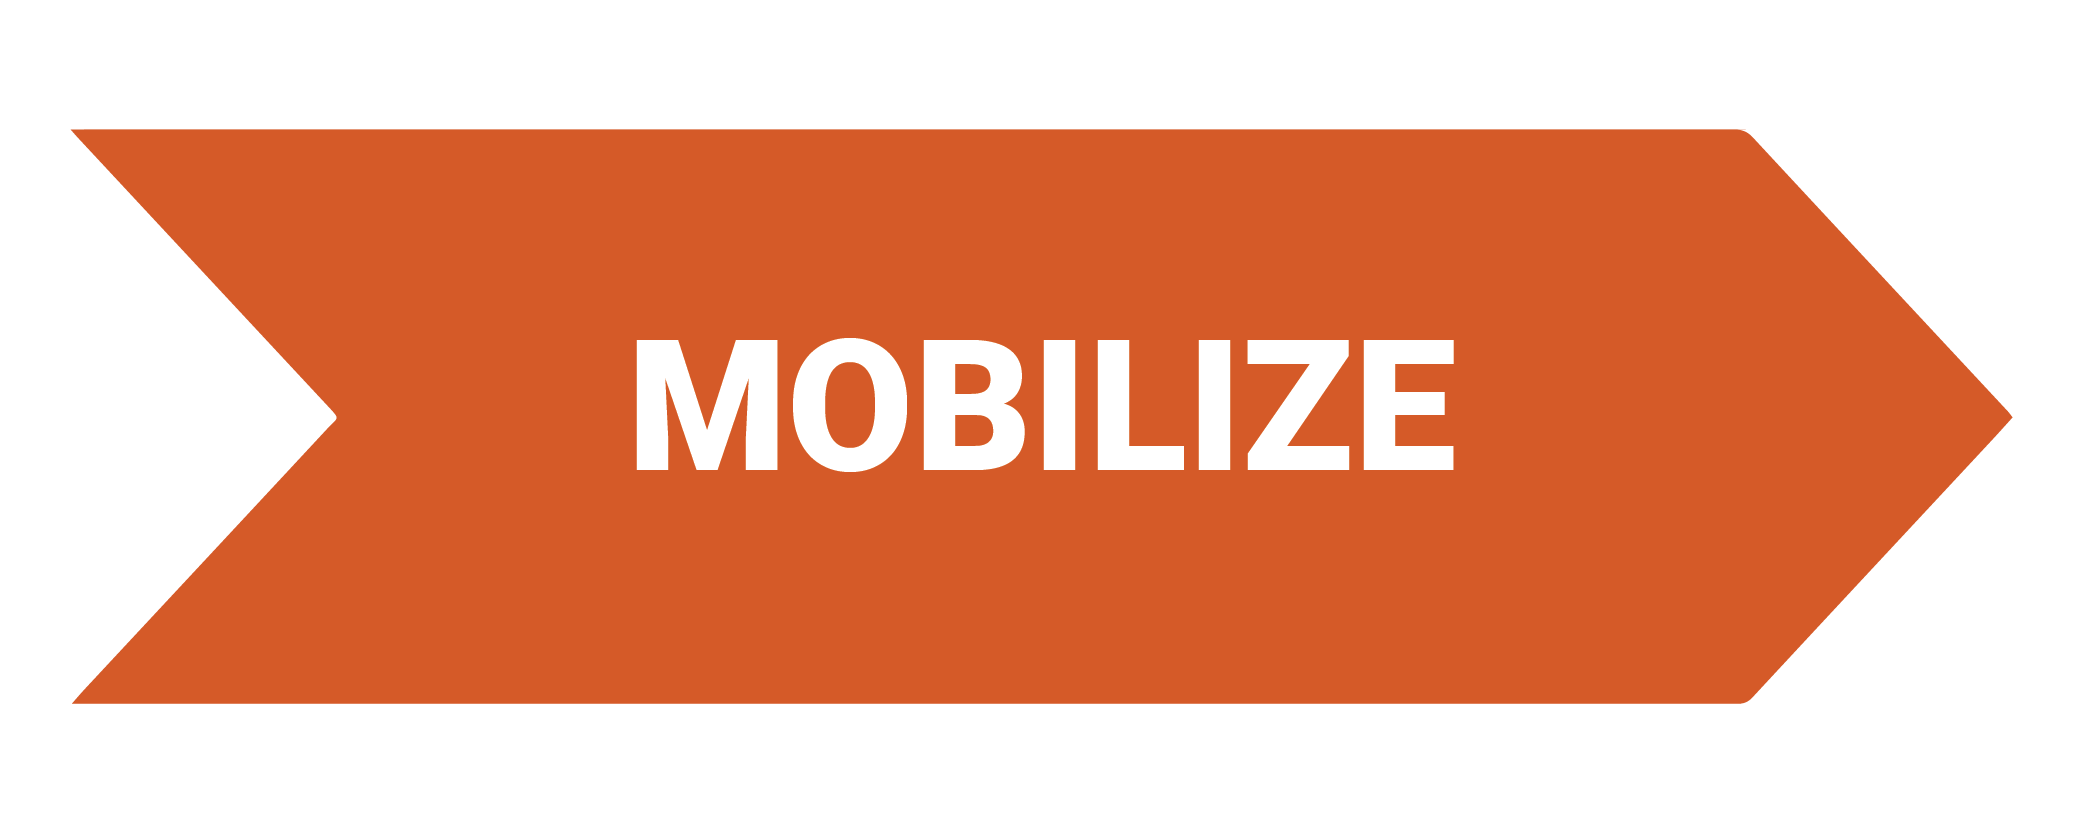 The second step in the migration process is the mobilize stage.